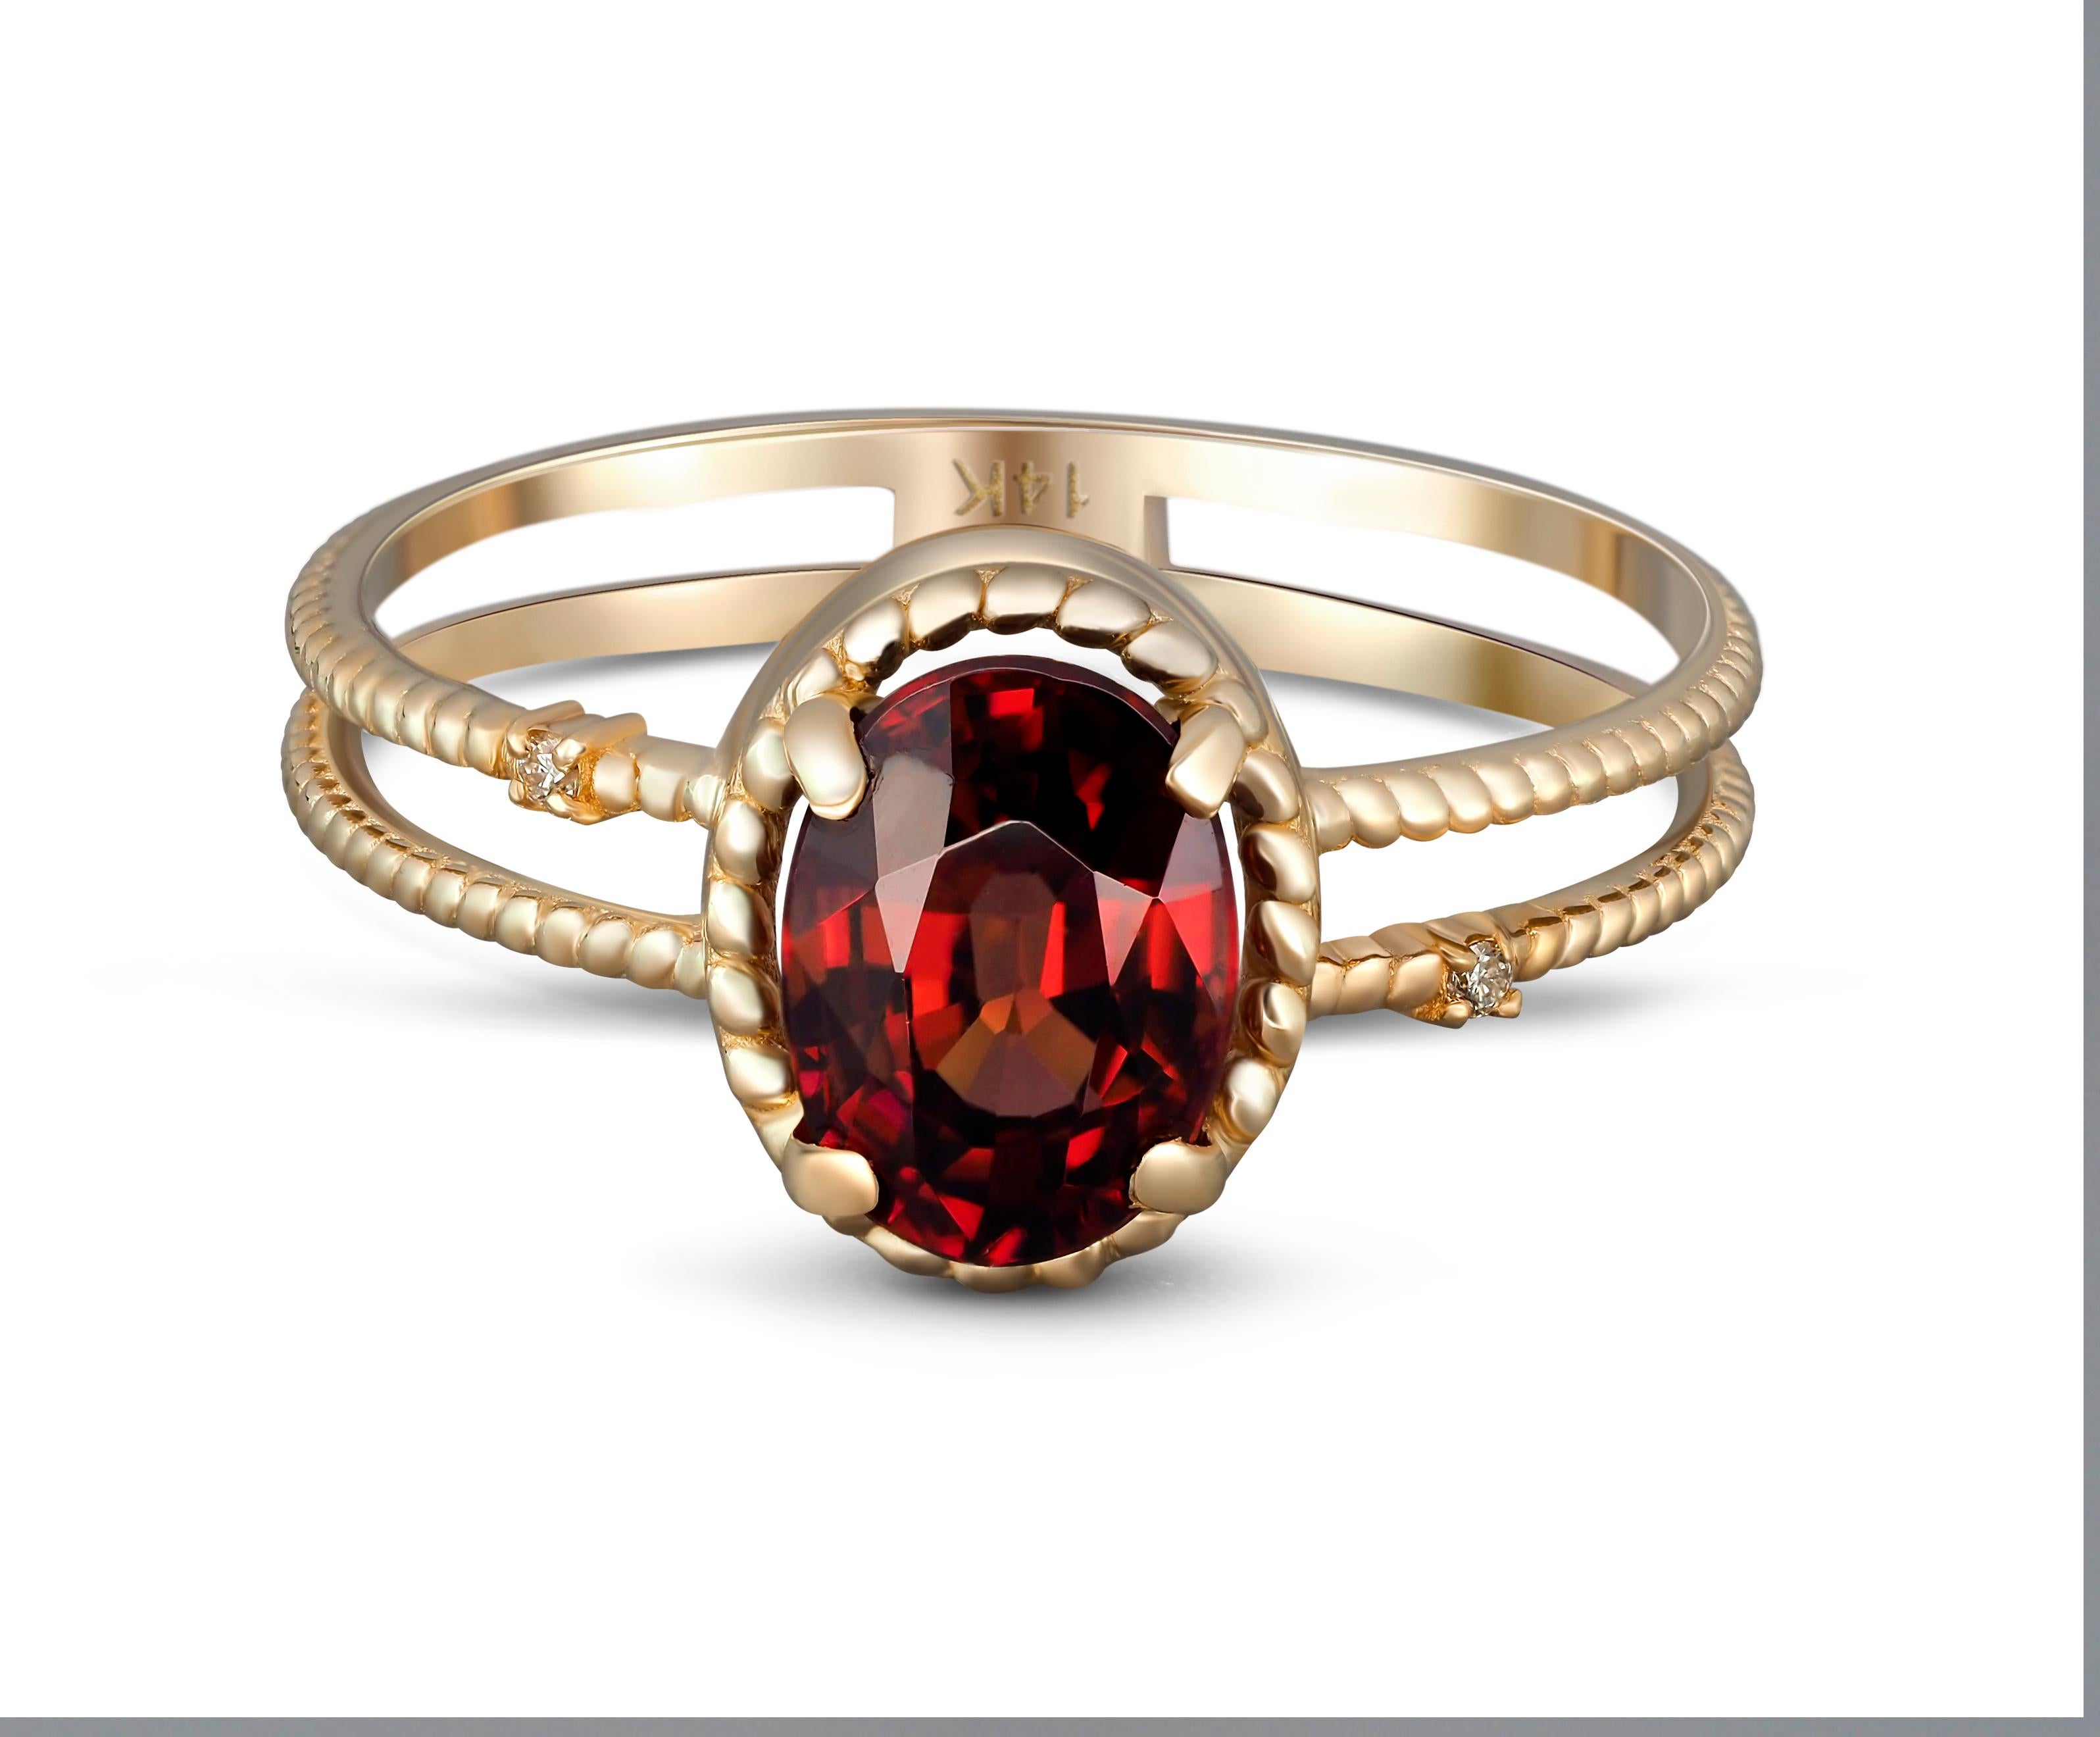 Metal: 14k gold

Weight: 1.8  g. depends from size.

Central stone: Natural garnet
Weight -  approx 0.80 ct in total, oval cut.
Clarity: Transparent with inclusions, color -   red.

Surrounding stones:
Diamonds: G/Vs, round brilliant cut,